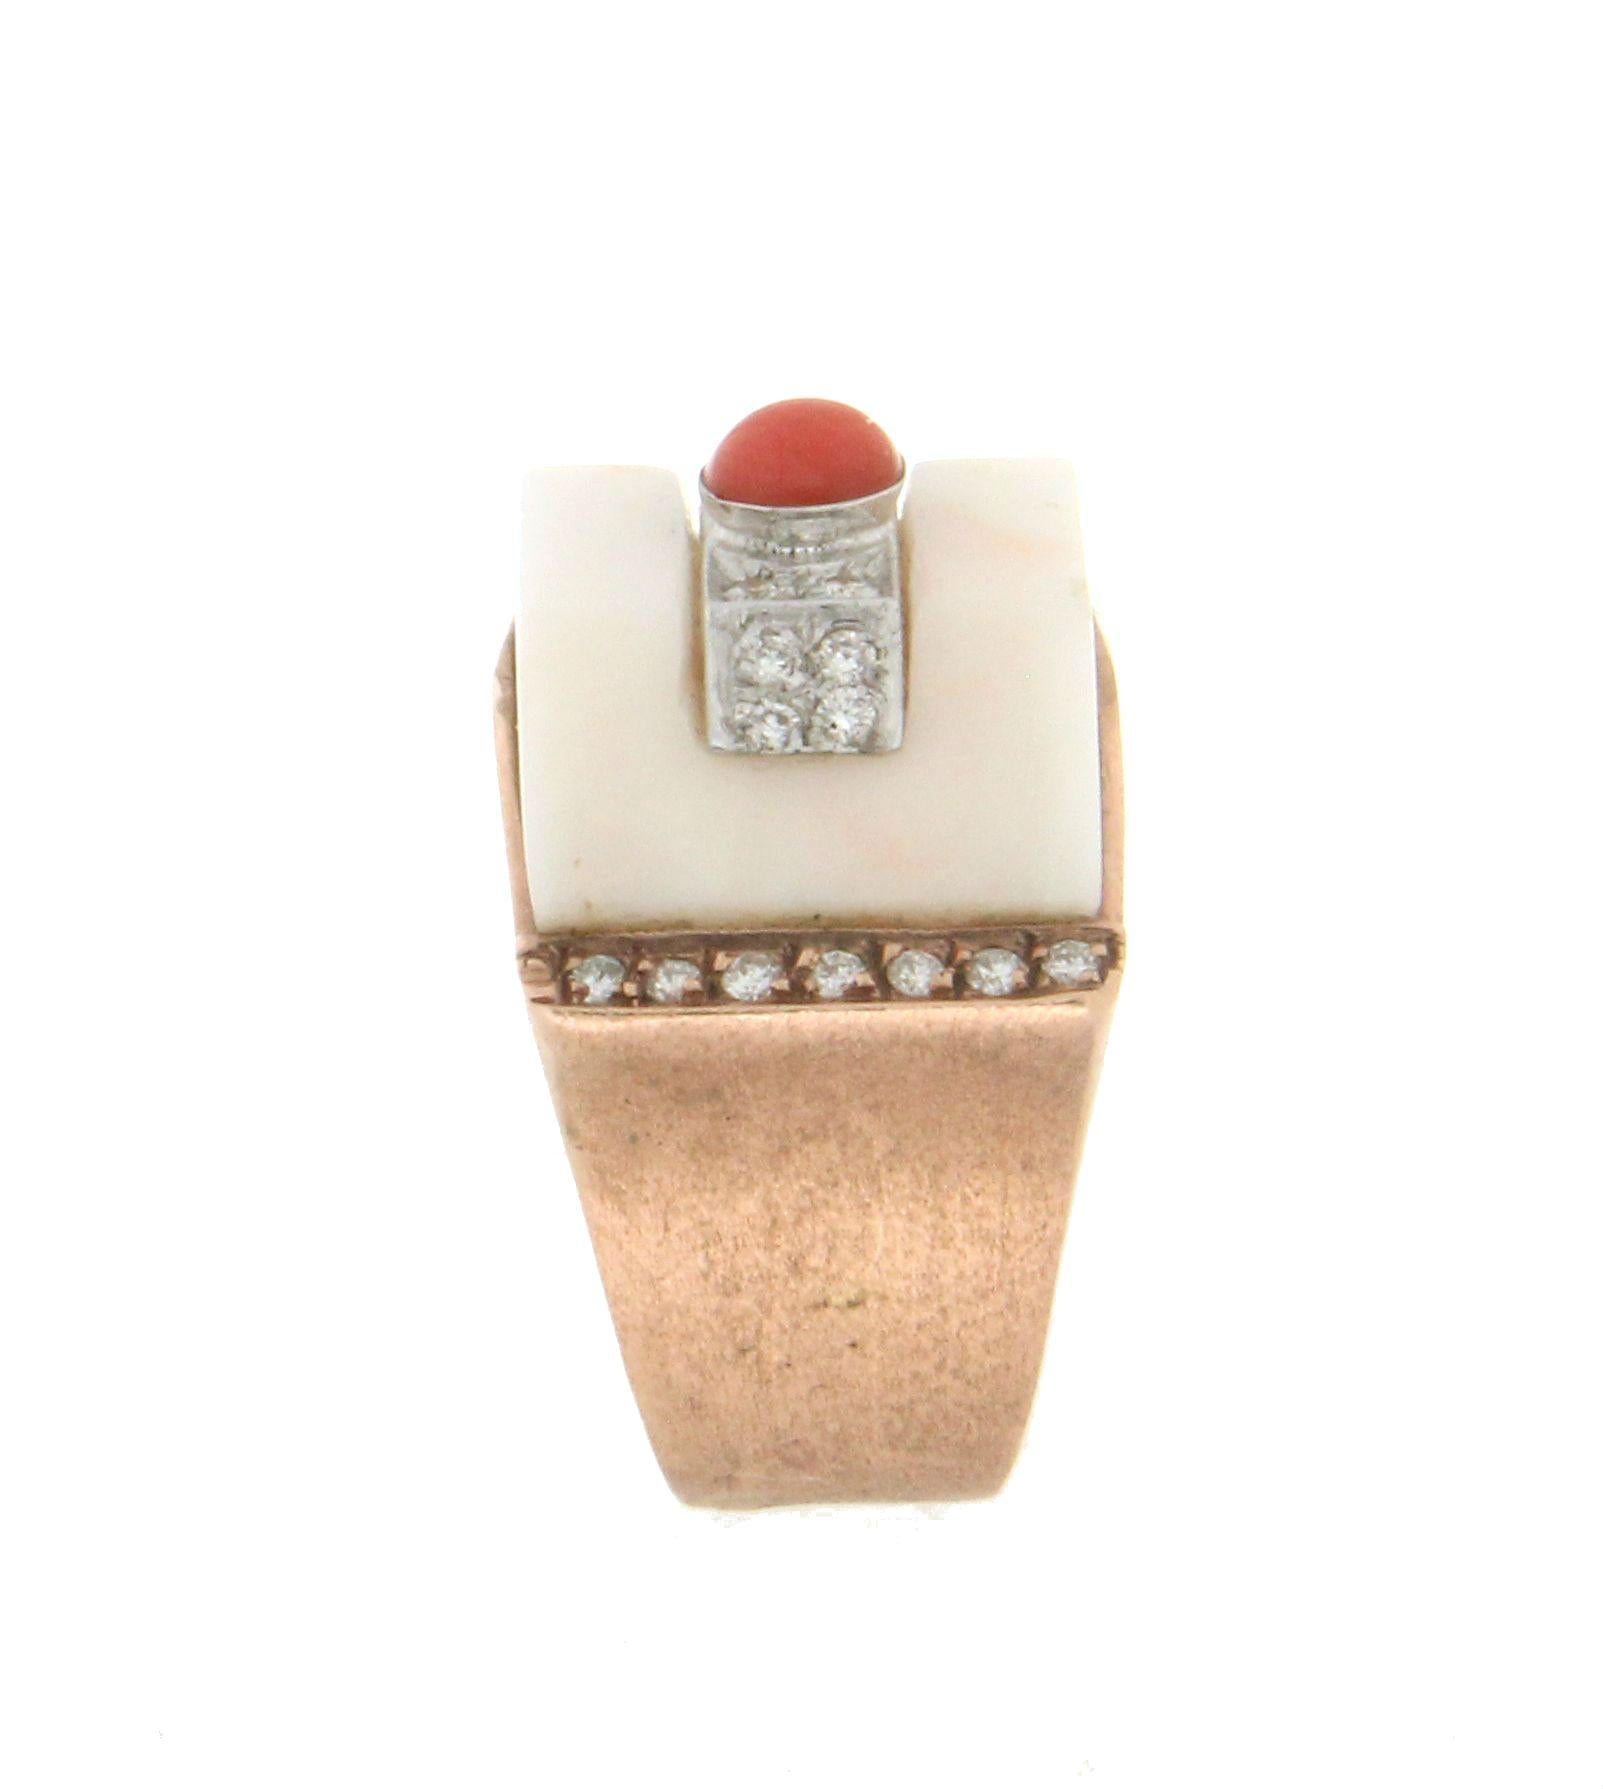 Brilliant Cut Handcraft White Coral 9 Karat White and Yellow Gold Diamonds Cocktail Ring For Sale